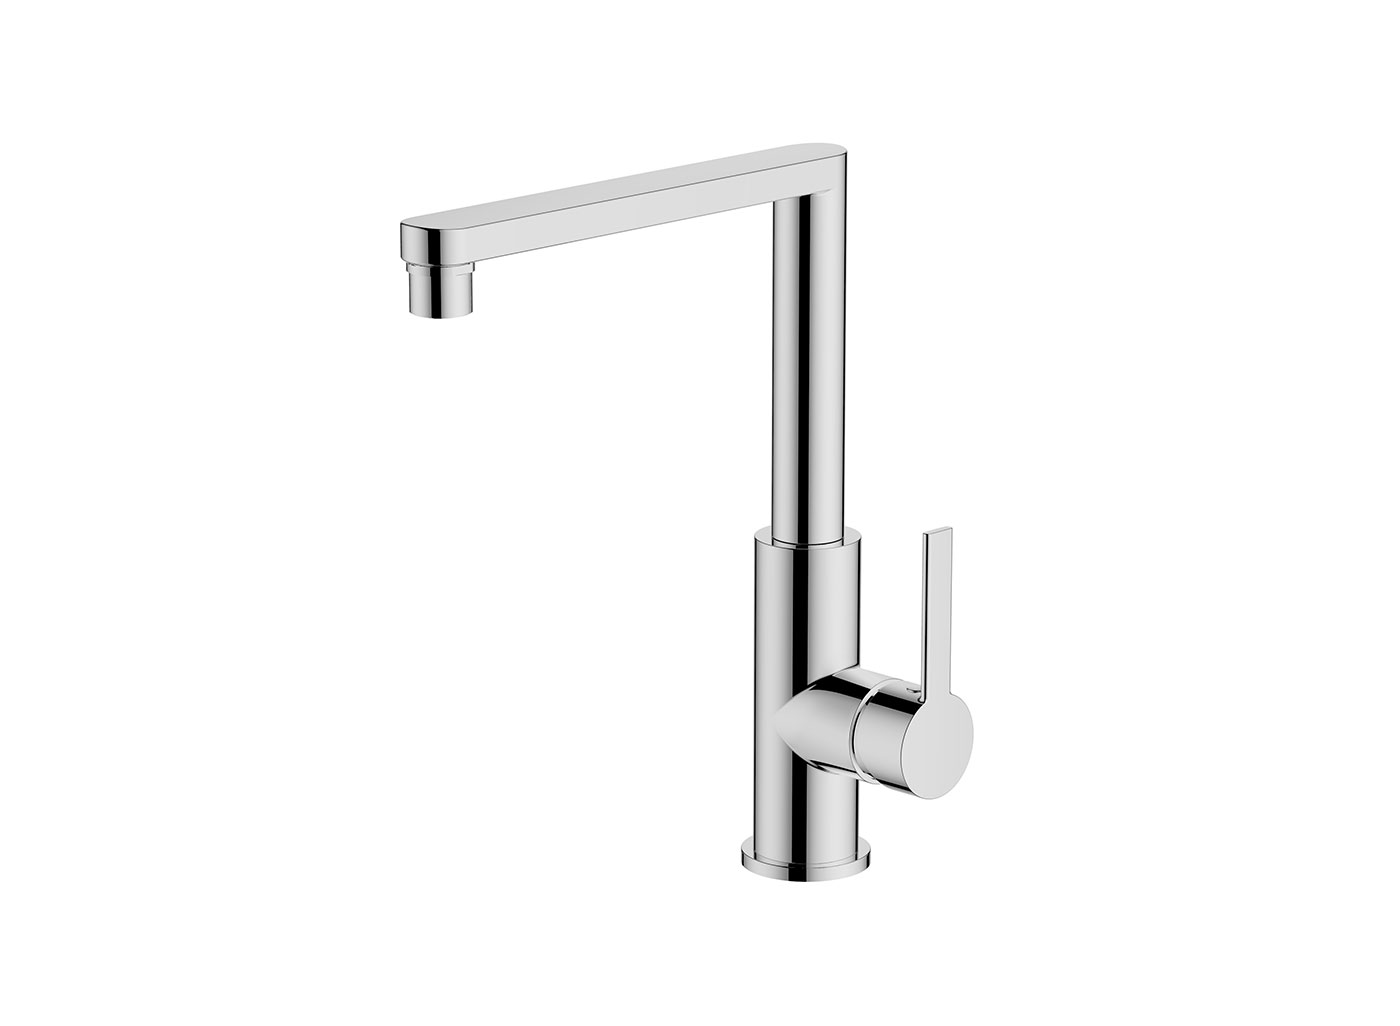 Introducing Greens Optima - an exclusive range of bathroom and kitchen mixers & showers. Inspired by the timeless pin-lever design the Optima products are guaranteed to elevate any room with its refined appearance.